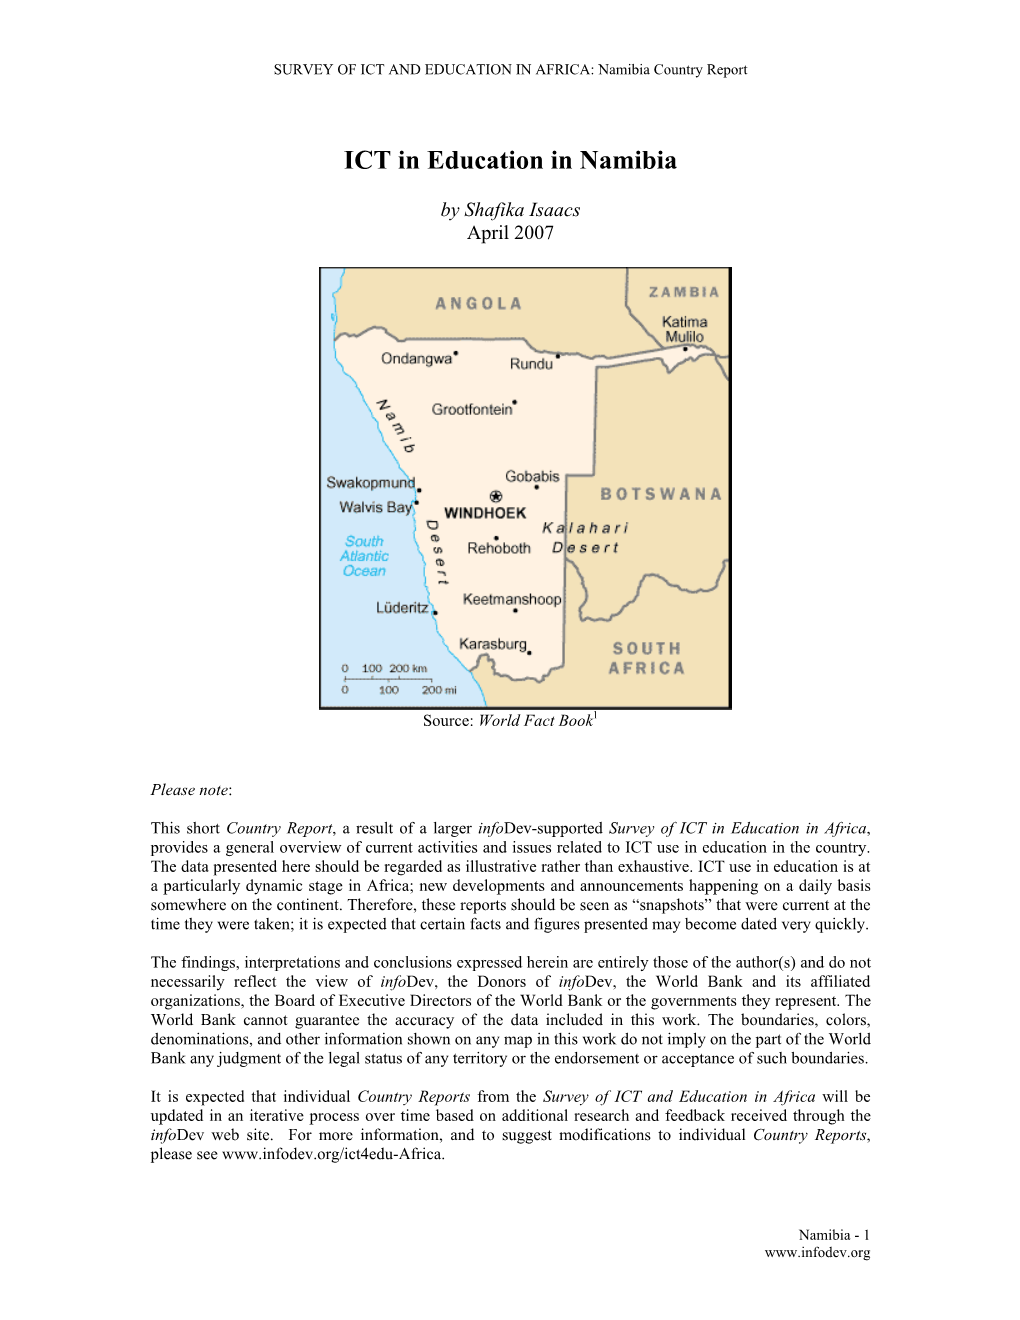 Survey of ICT and Education in Africa: Namibia Country Report